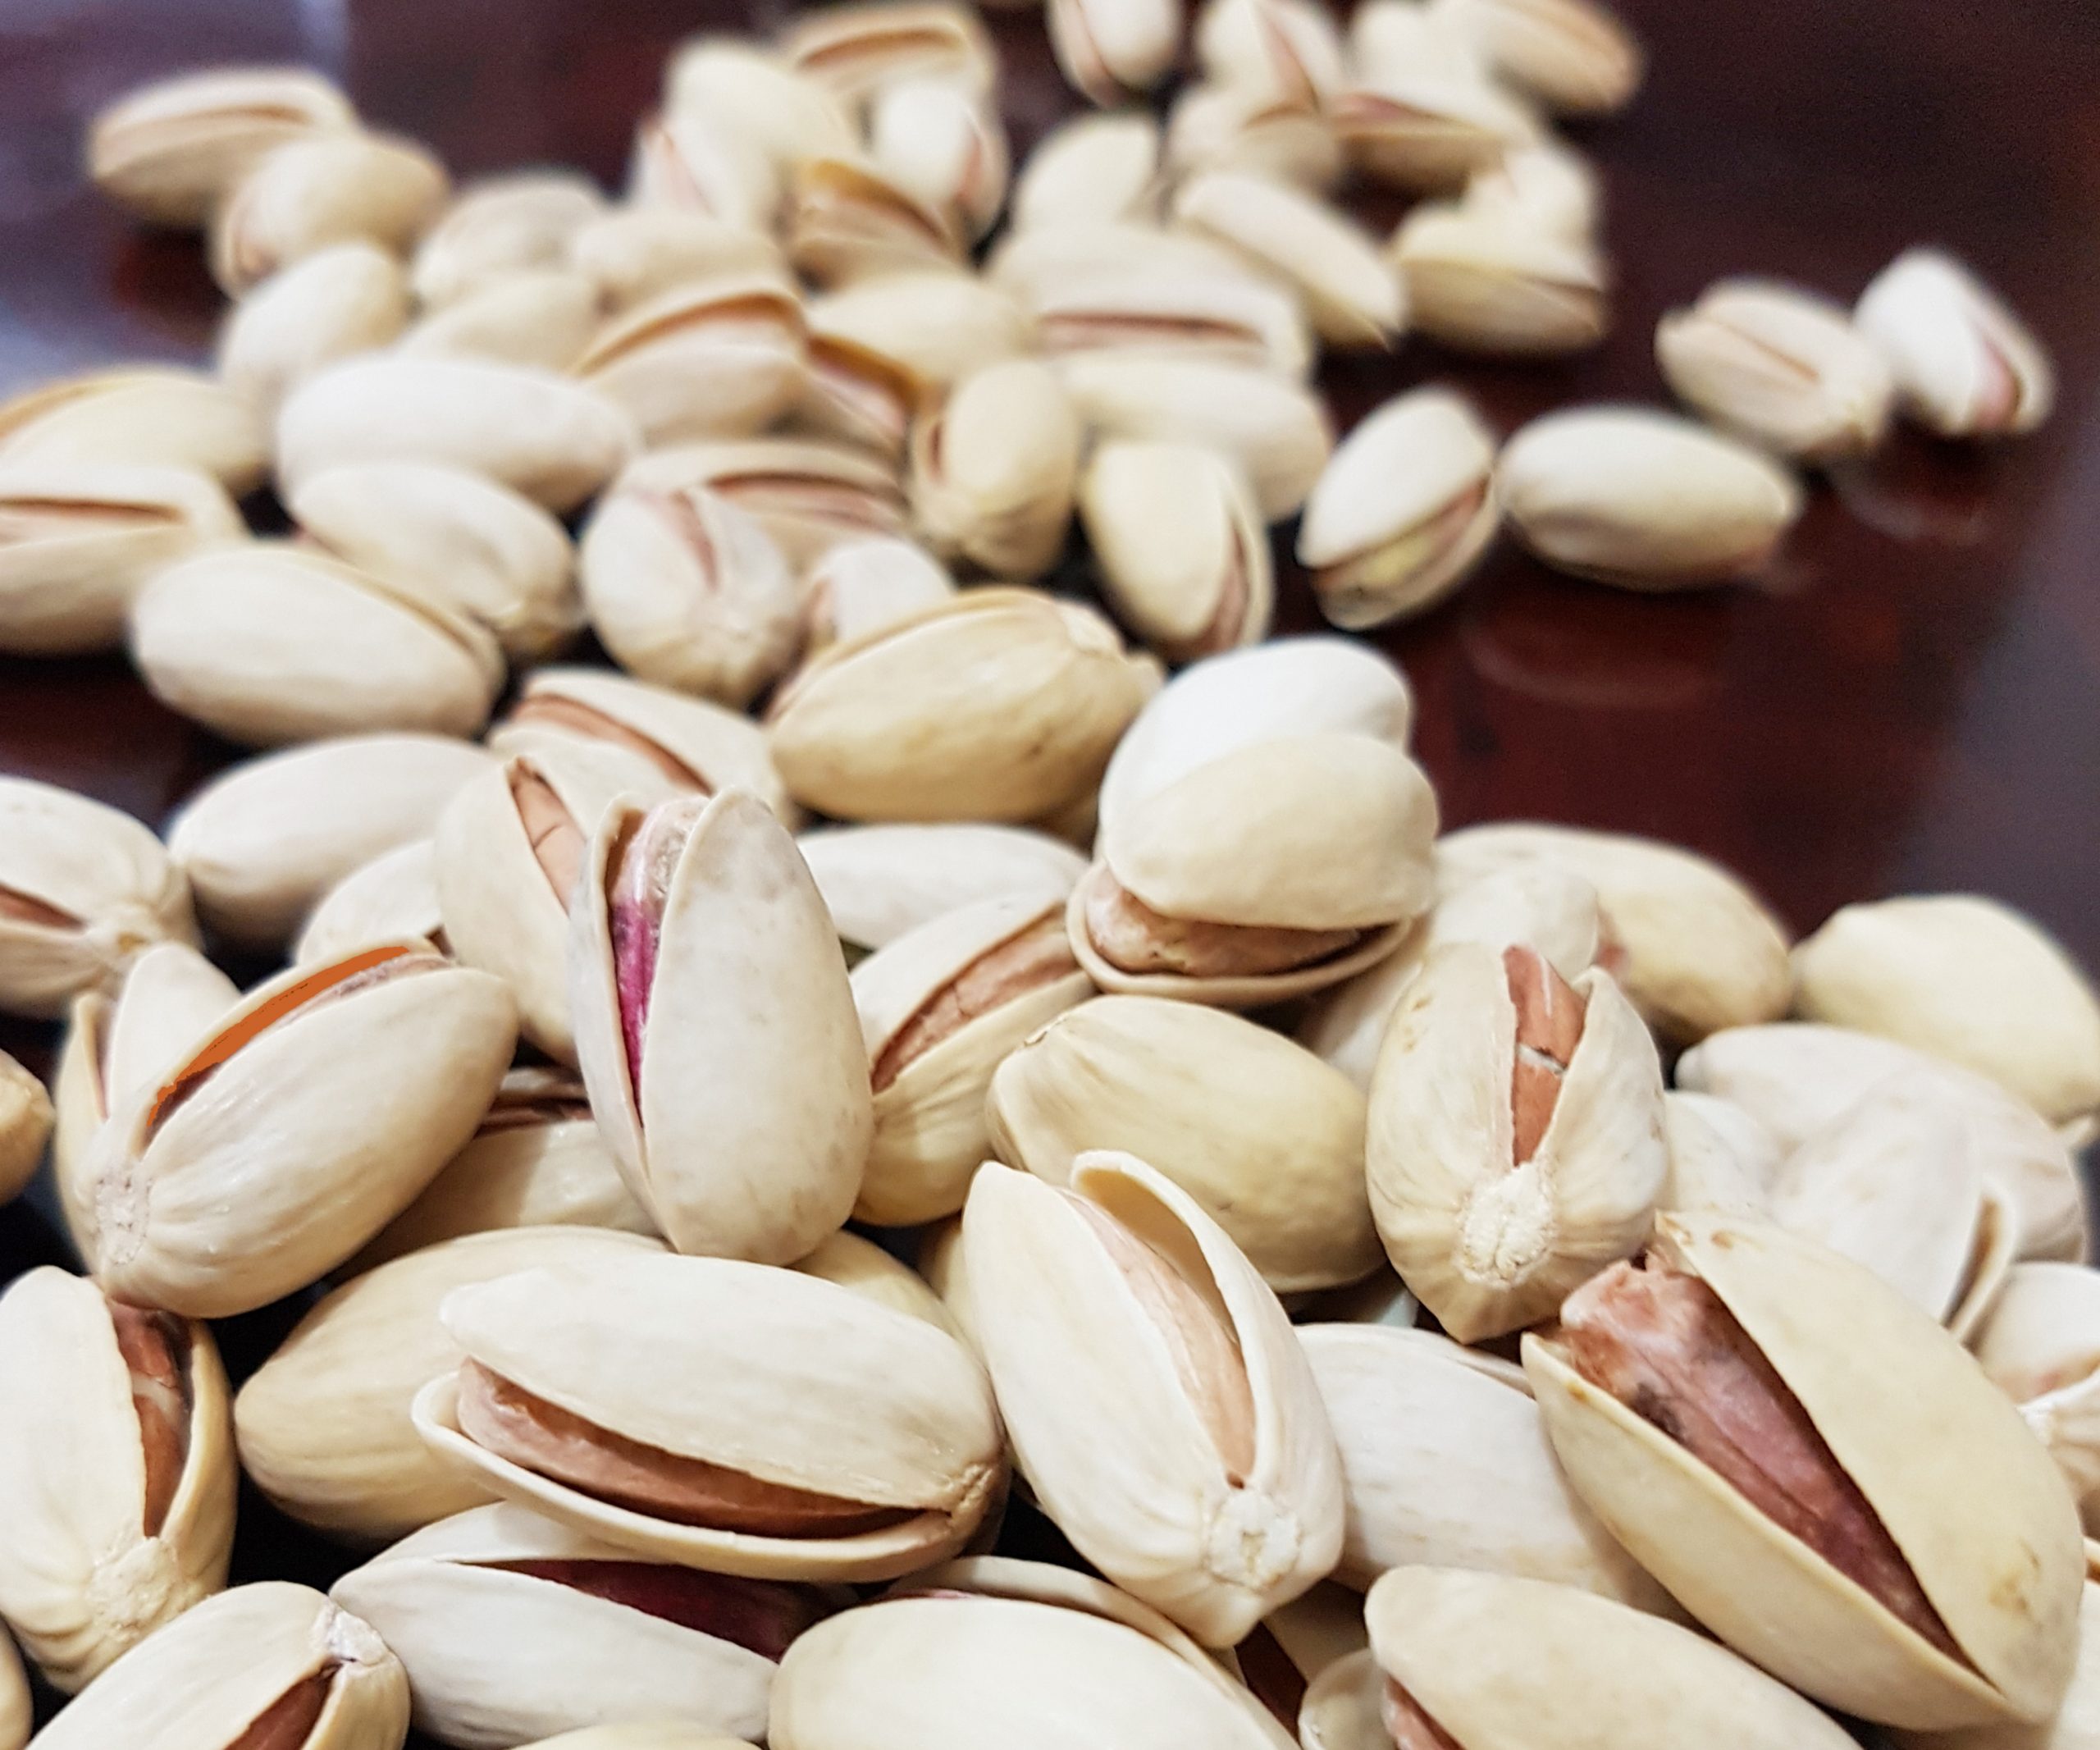 Buy Quality pistachio from Iran at The Best Price - Wholesale Pistachios at Nutex - Quality Products‚ Fair Prices